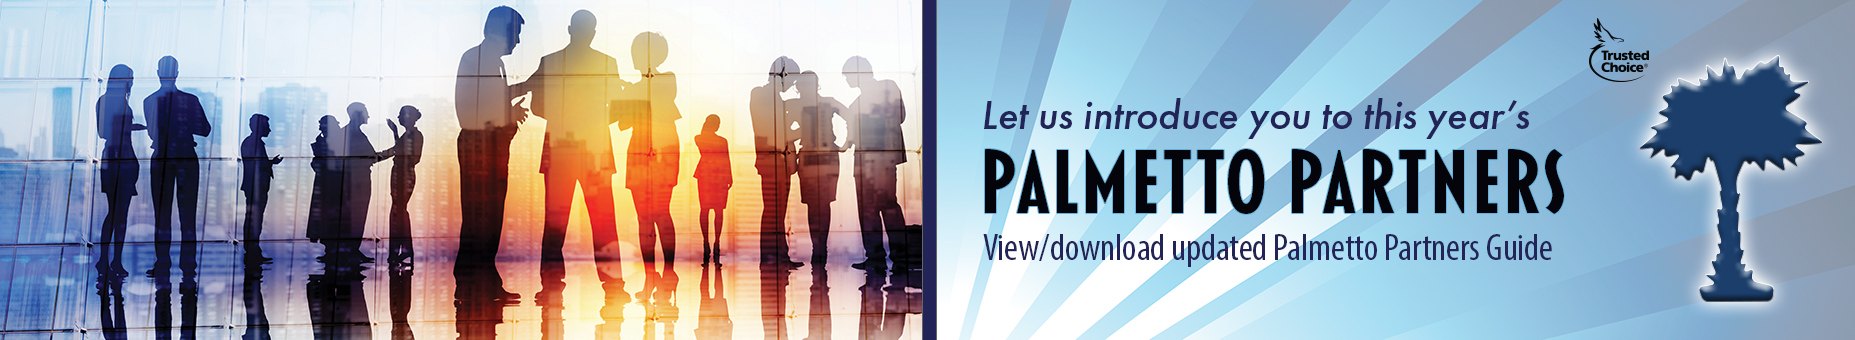 Introducing this year's Palmetto Partners